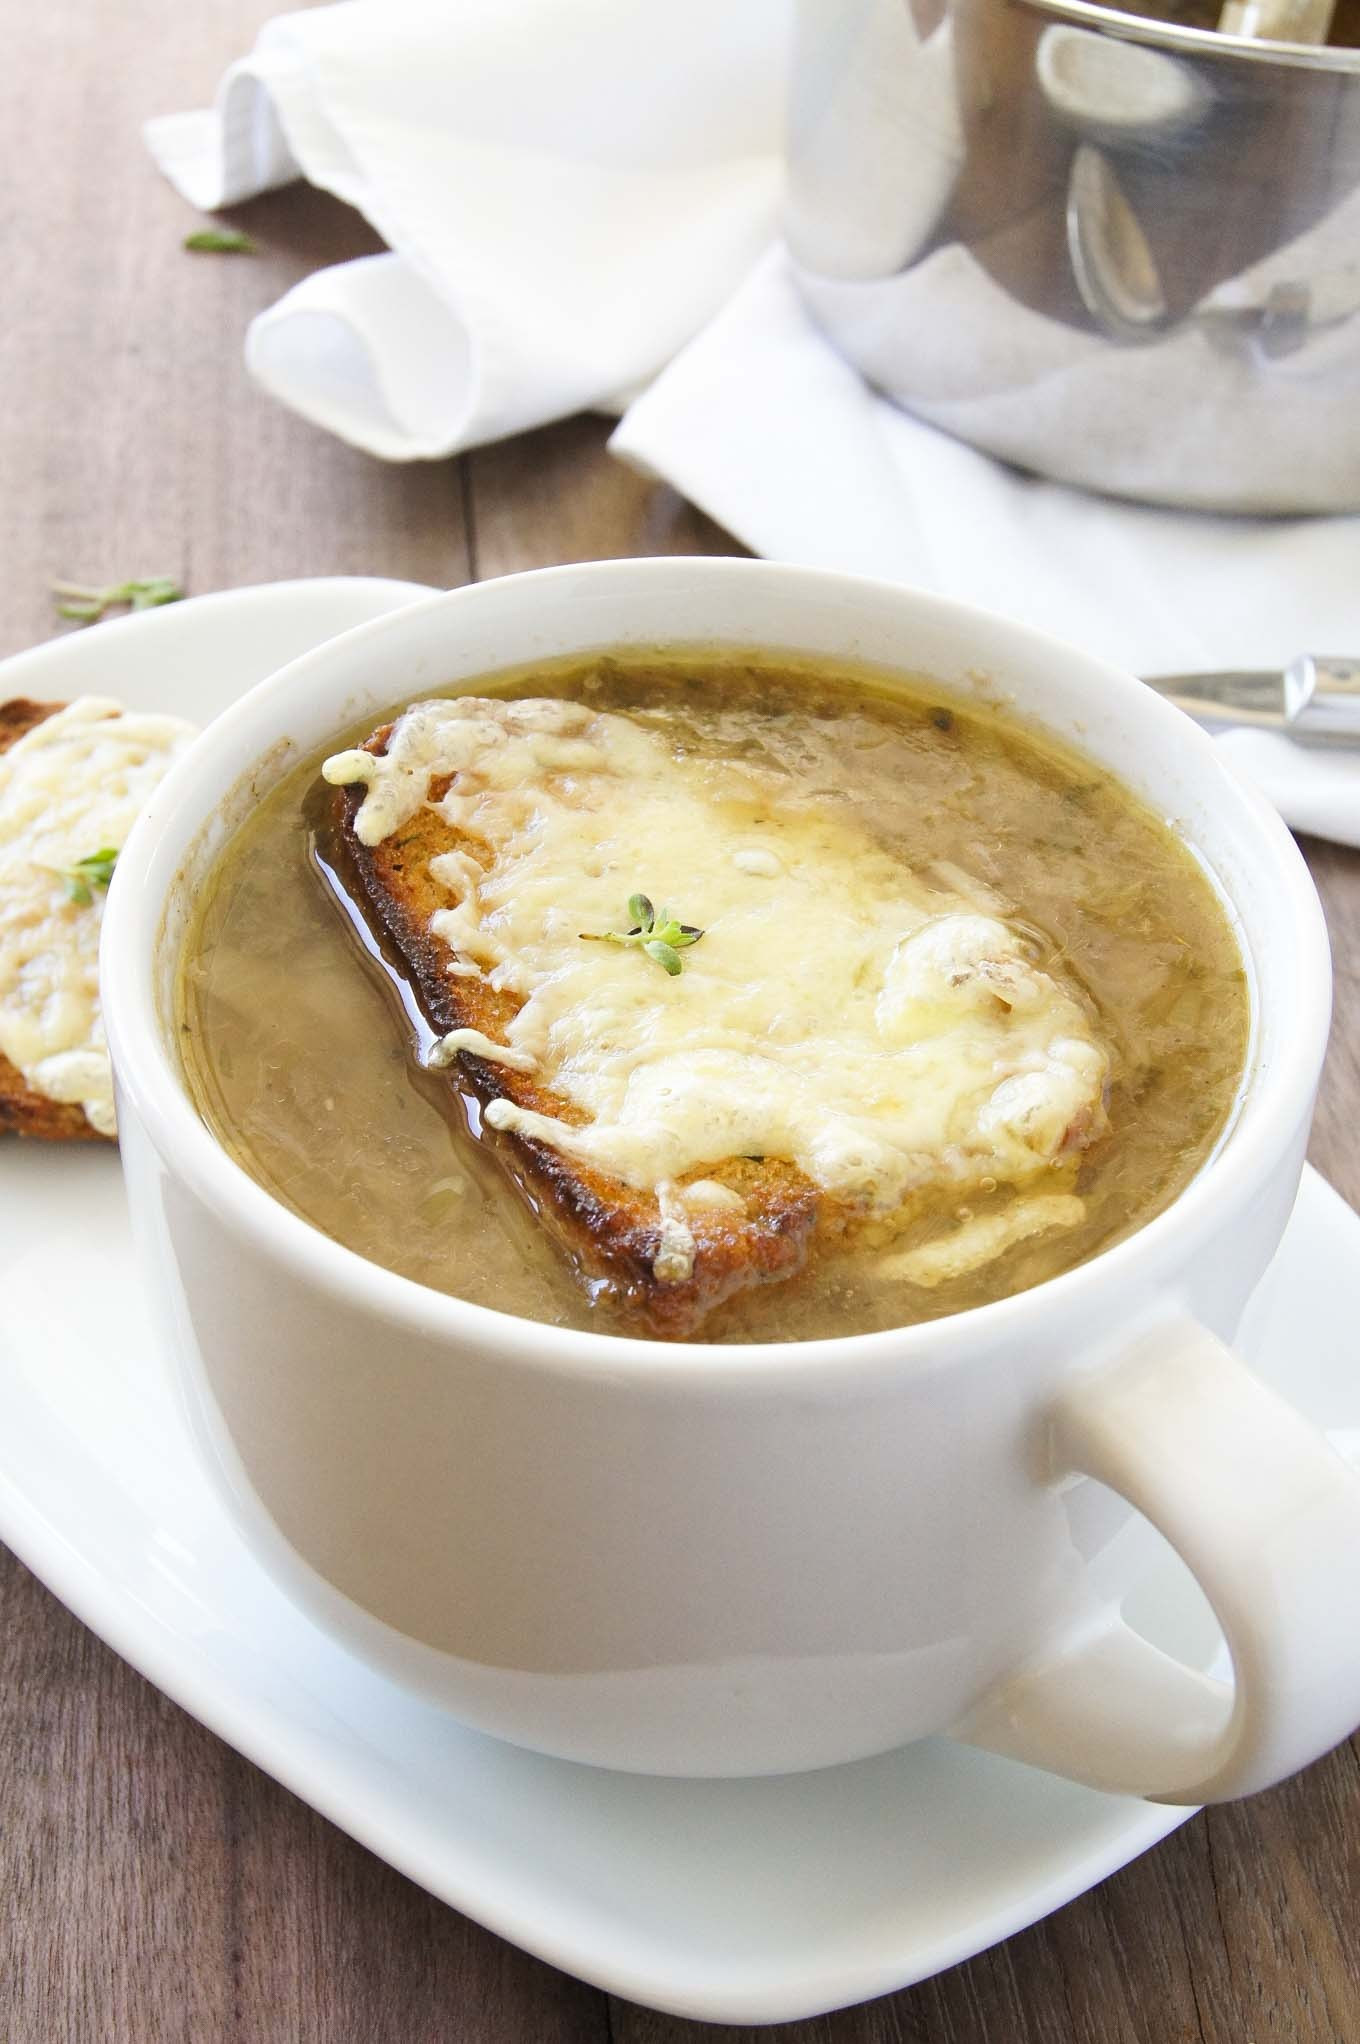 Classic French Onion Soup Recipe
 CLASSIC FRENCH ONION SOUP WITH CHEESY CROUTES